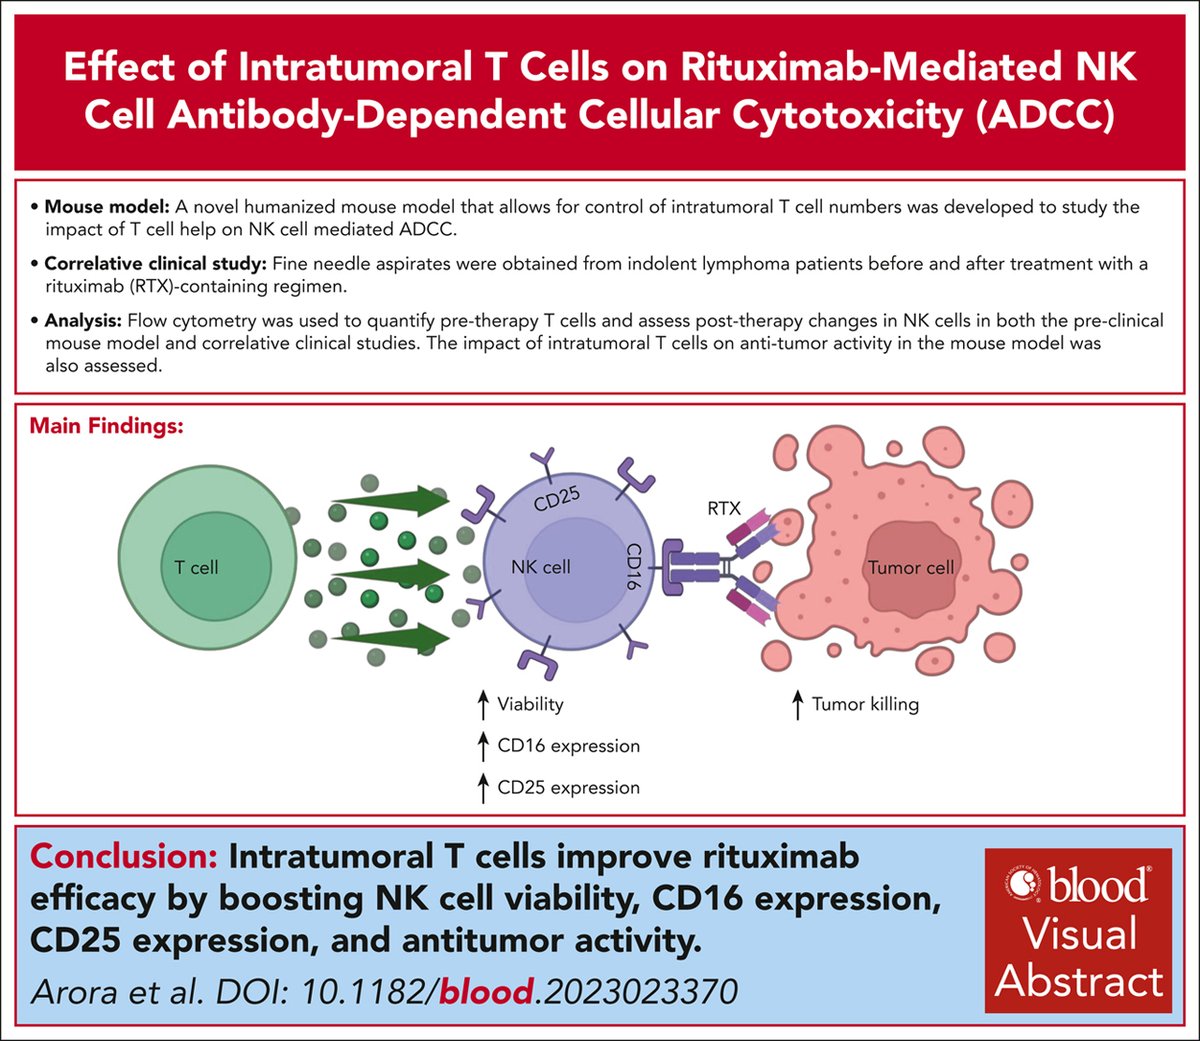 T-cell help in the TME enhances rituximab-mediated NK-cell viability, CD16 and CD25 expression, and antitumor response. ow.ly/7z1V50RvWwl #immunobiologyandimmunotherapy #clinicaltrialsandobservations #lymphoidneoplasia